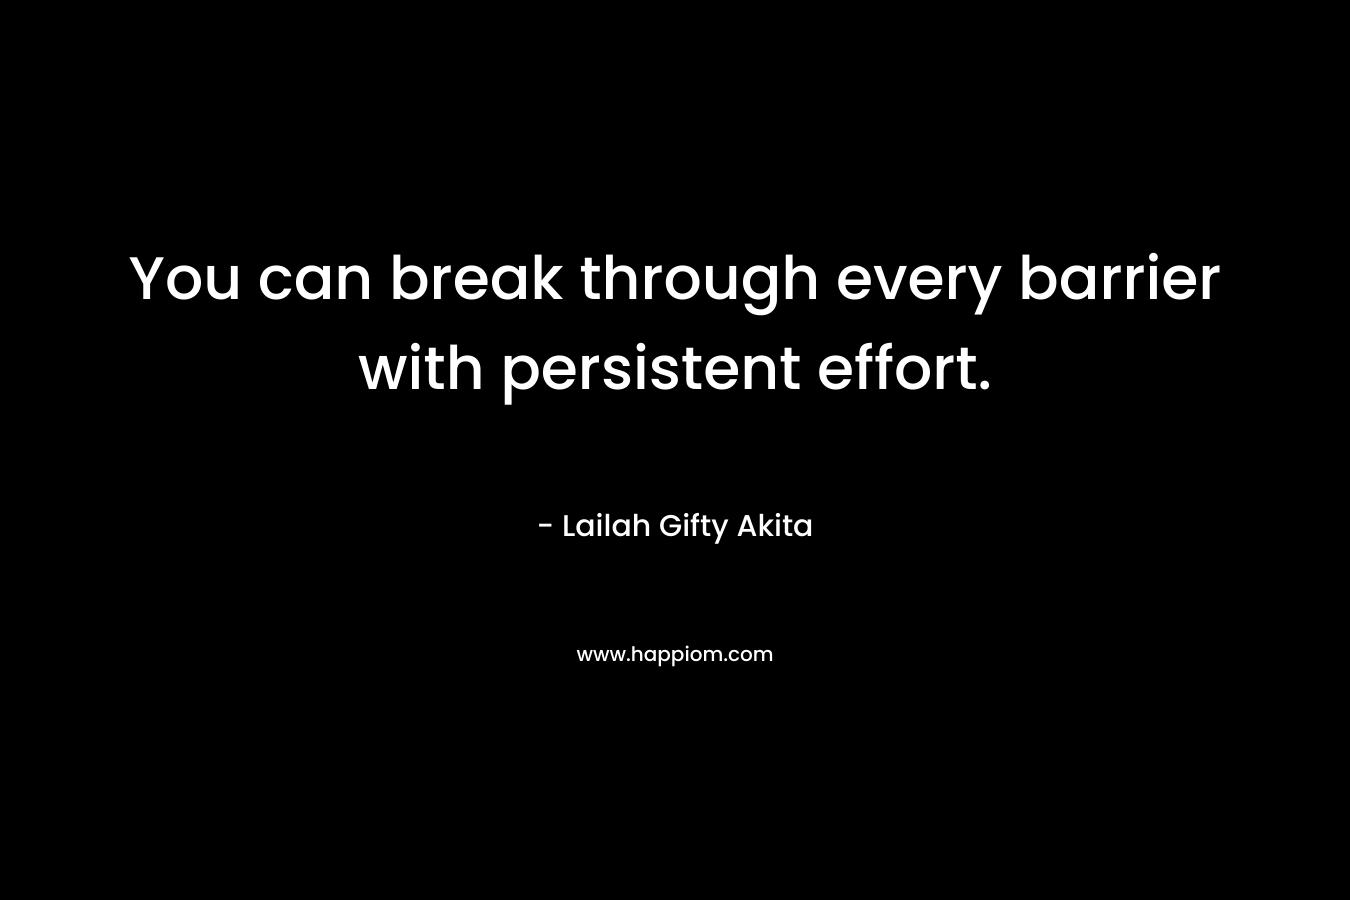 You can break through every barrier with persistent effort. – Lailah Gifty Akita